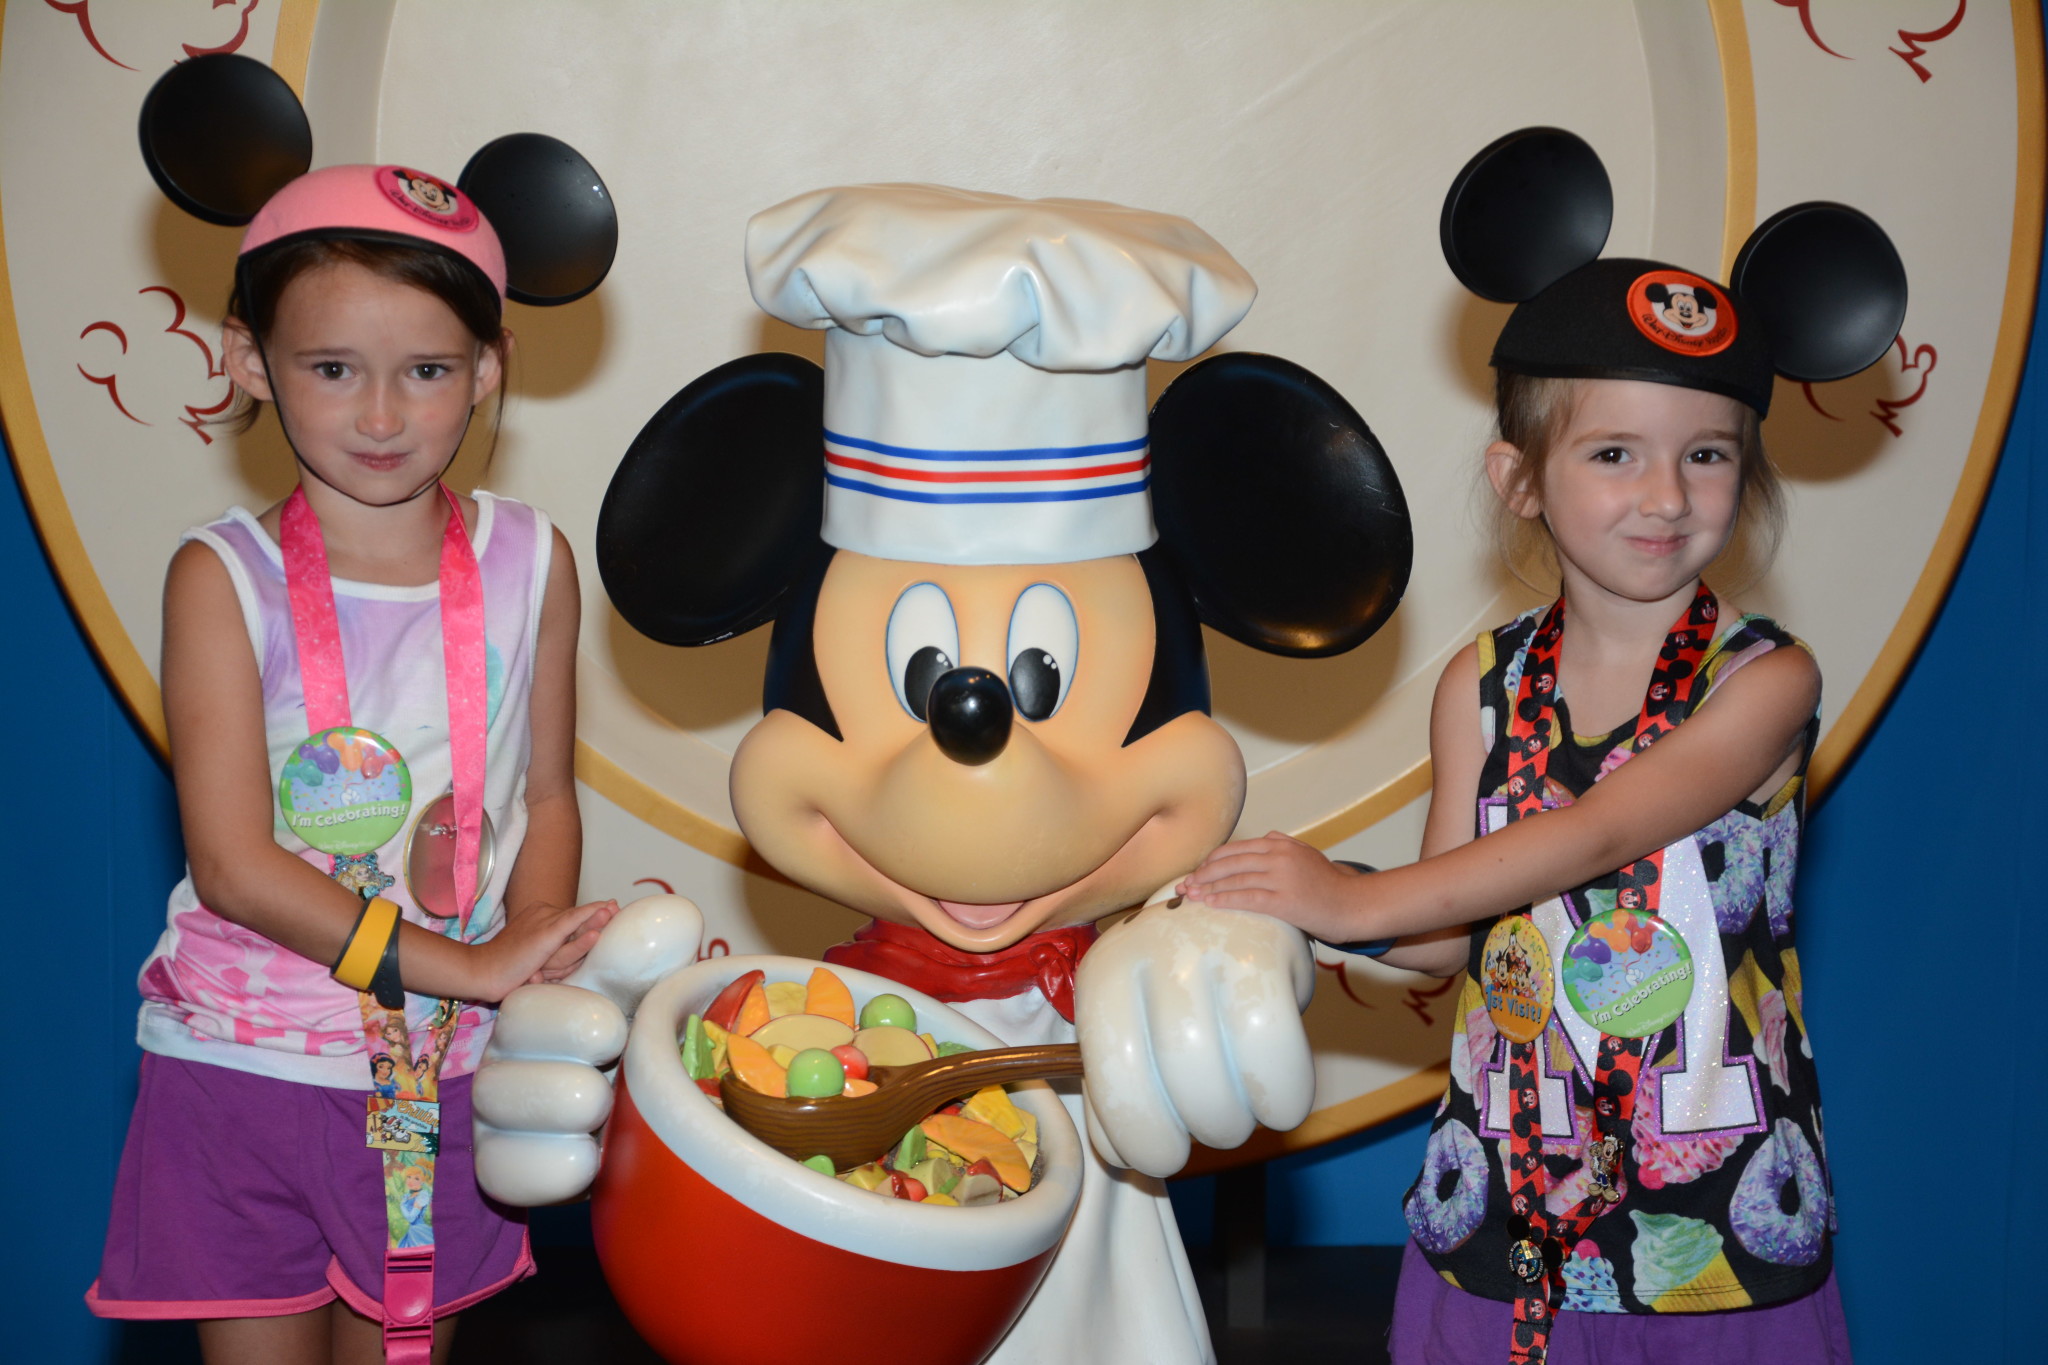 After the meltdown at Chef Mickey's in Disney's Contemporary Resort